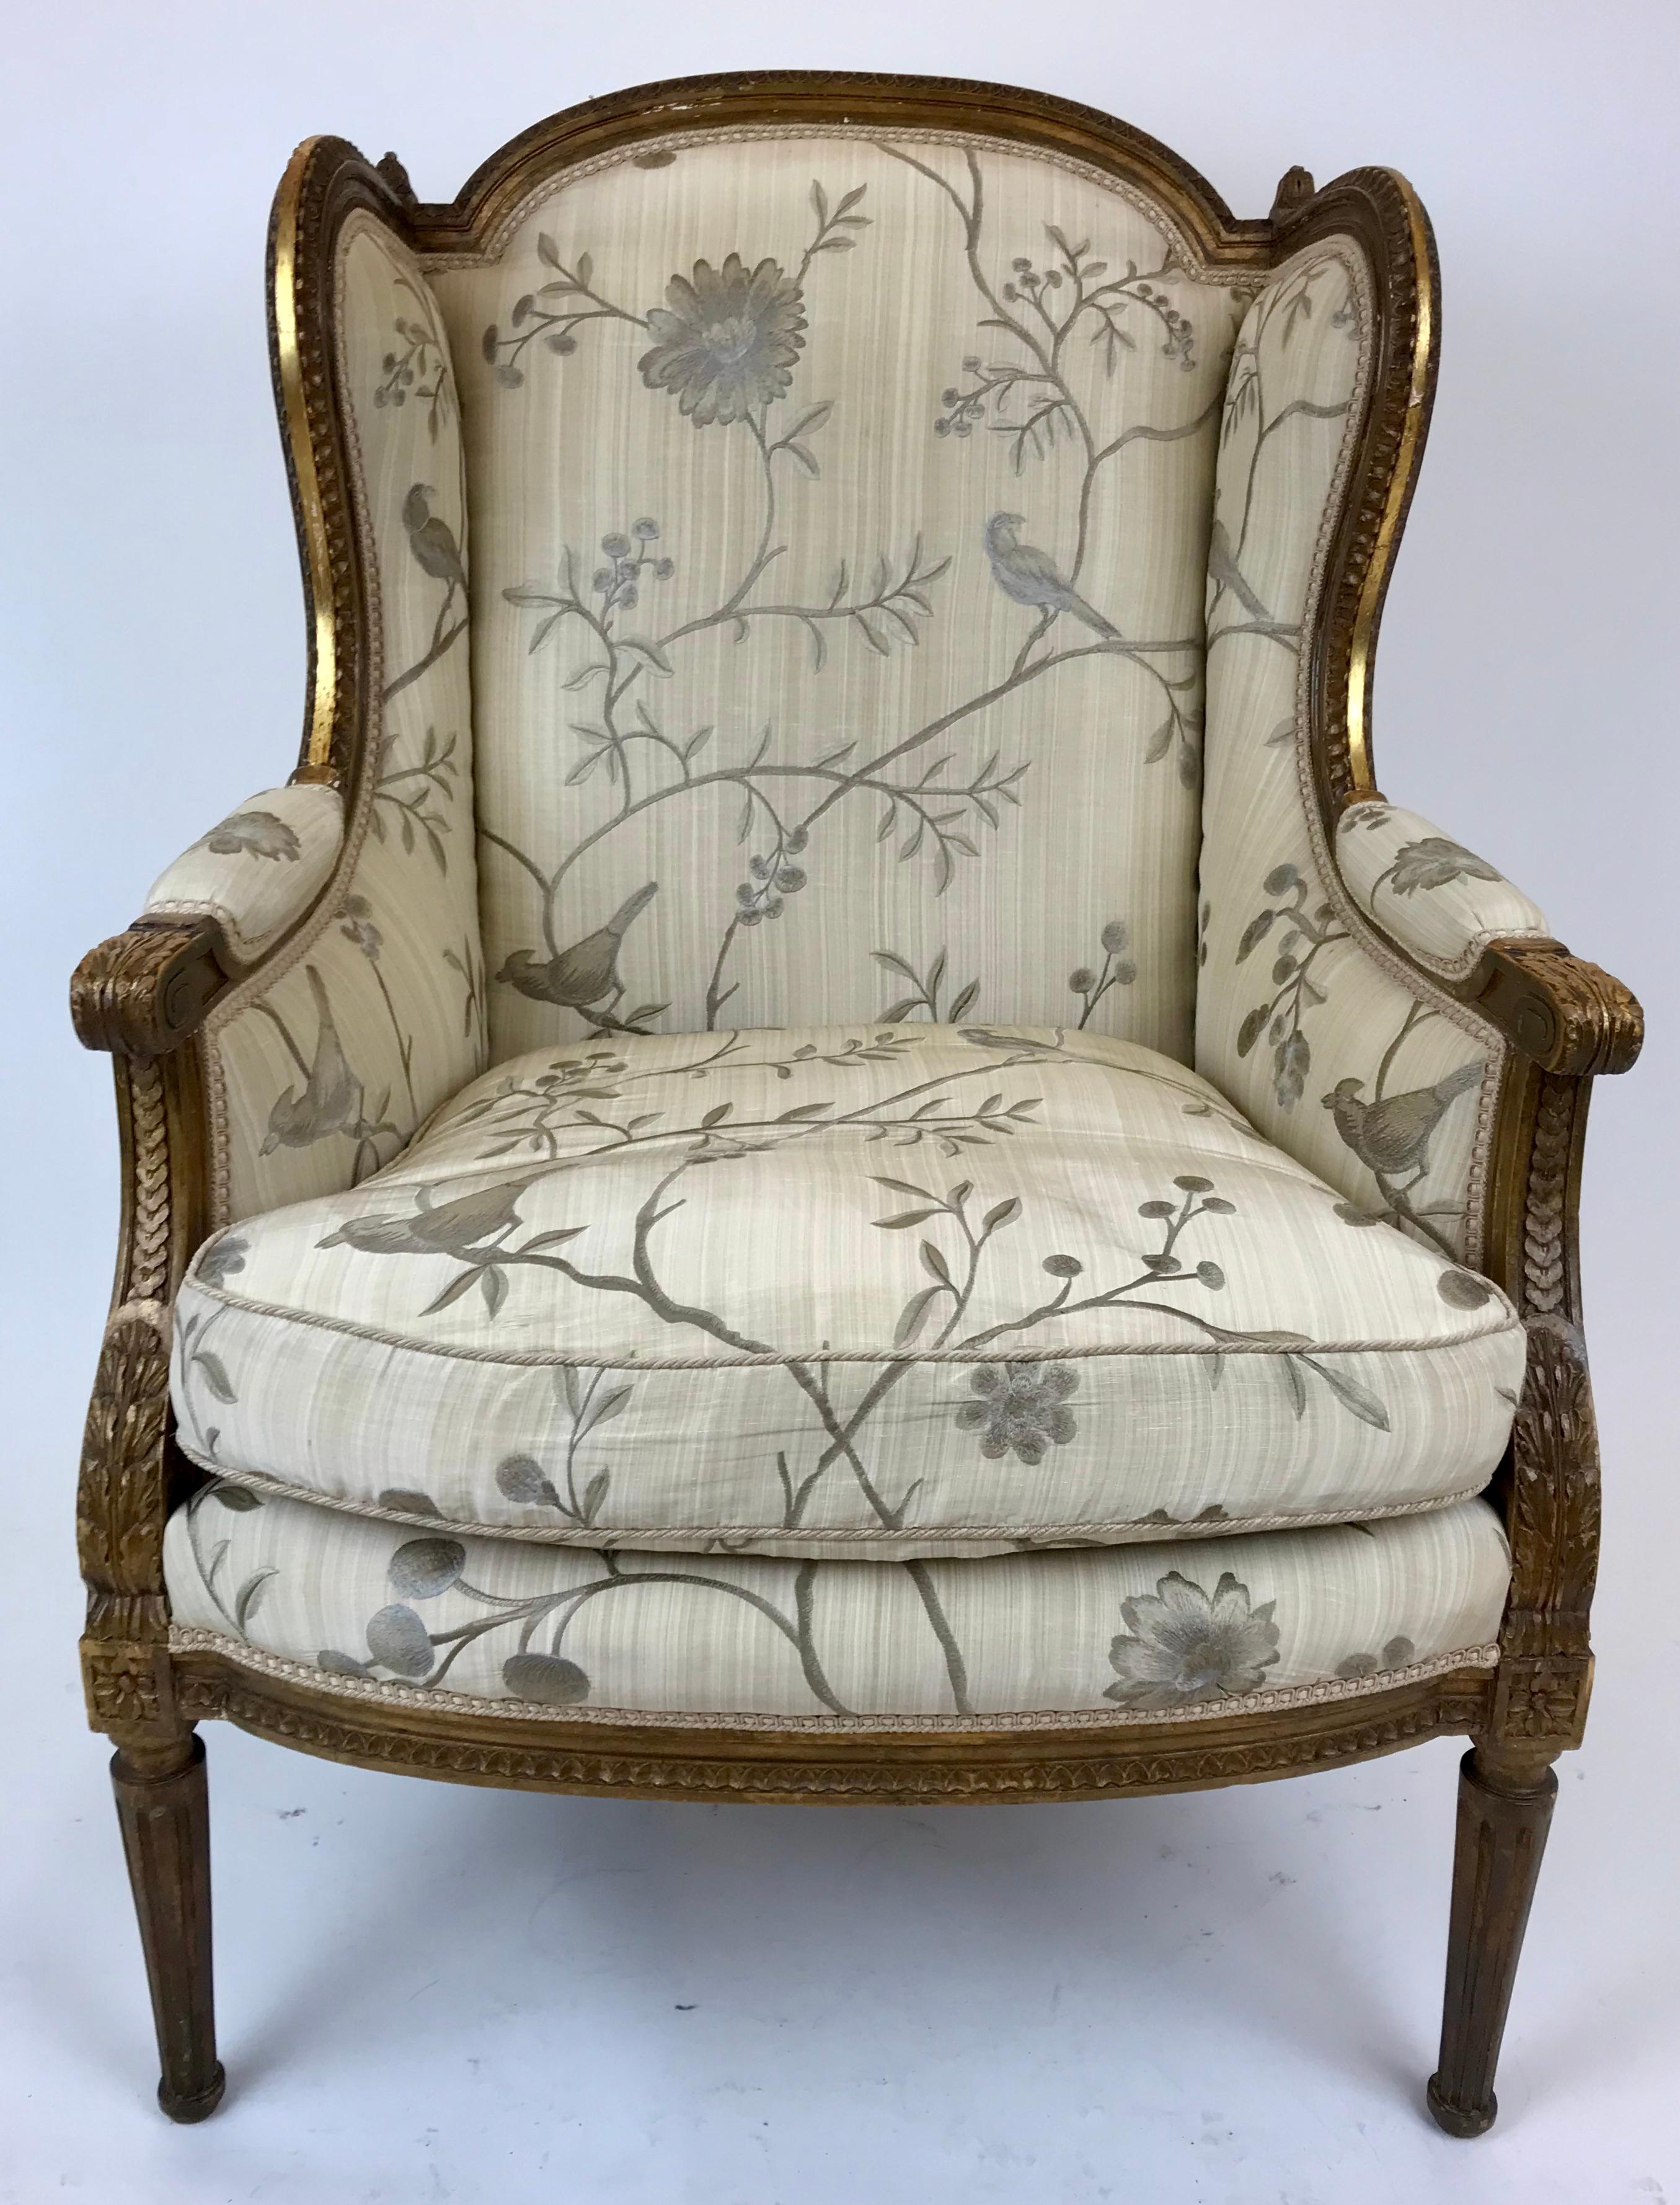 This hand carved Louis XVI style giltwood armchair features classic motifs including acanthus leaves, rosettes, and fluted tapered legs.